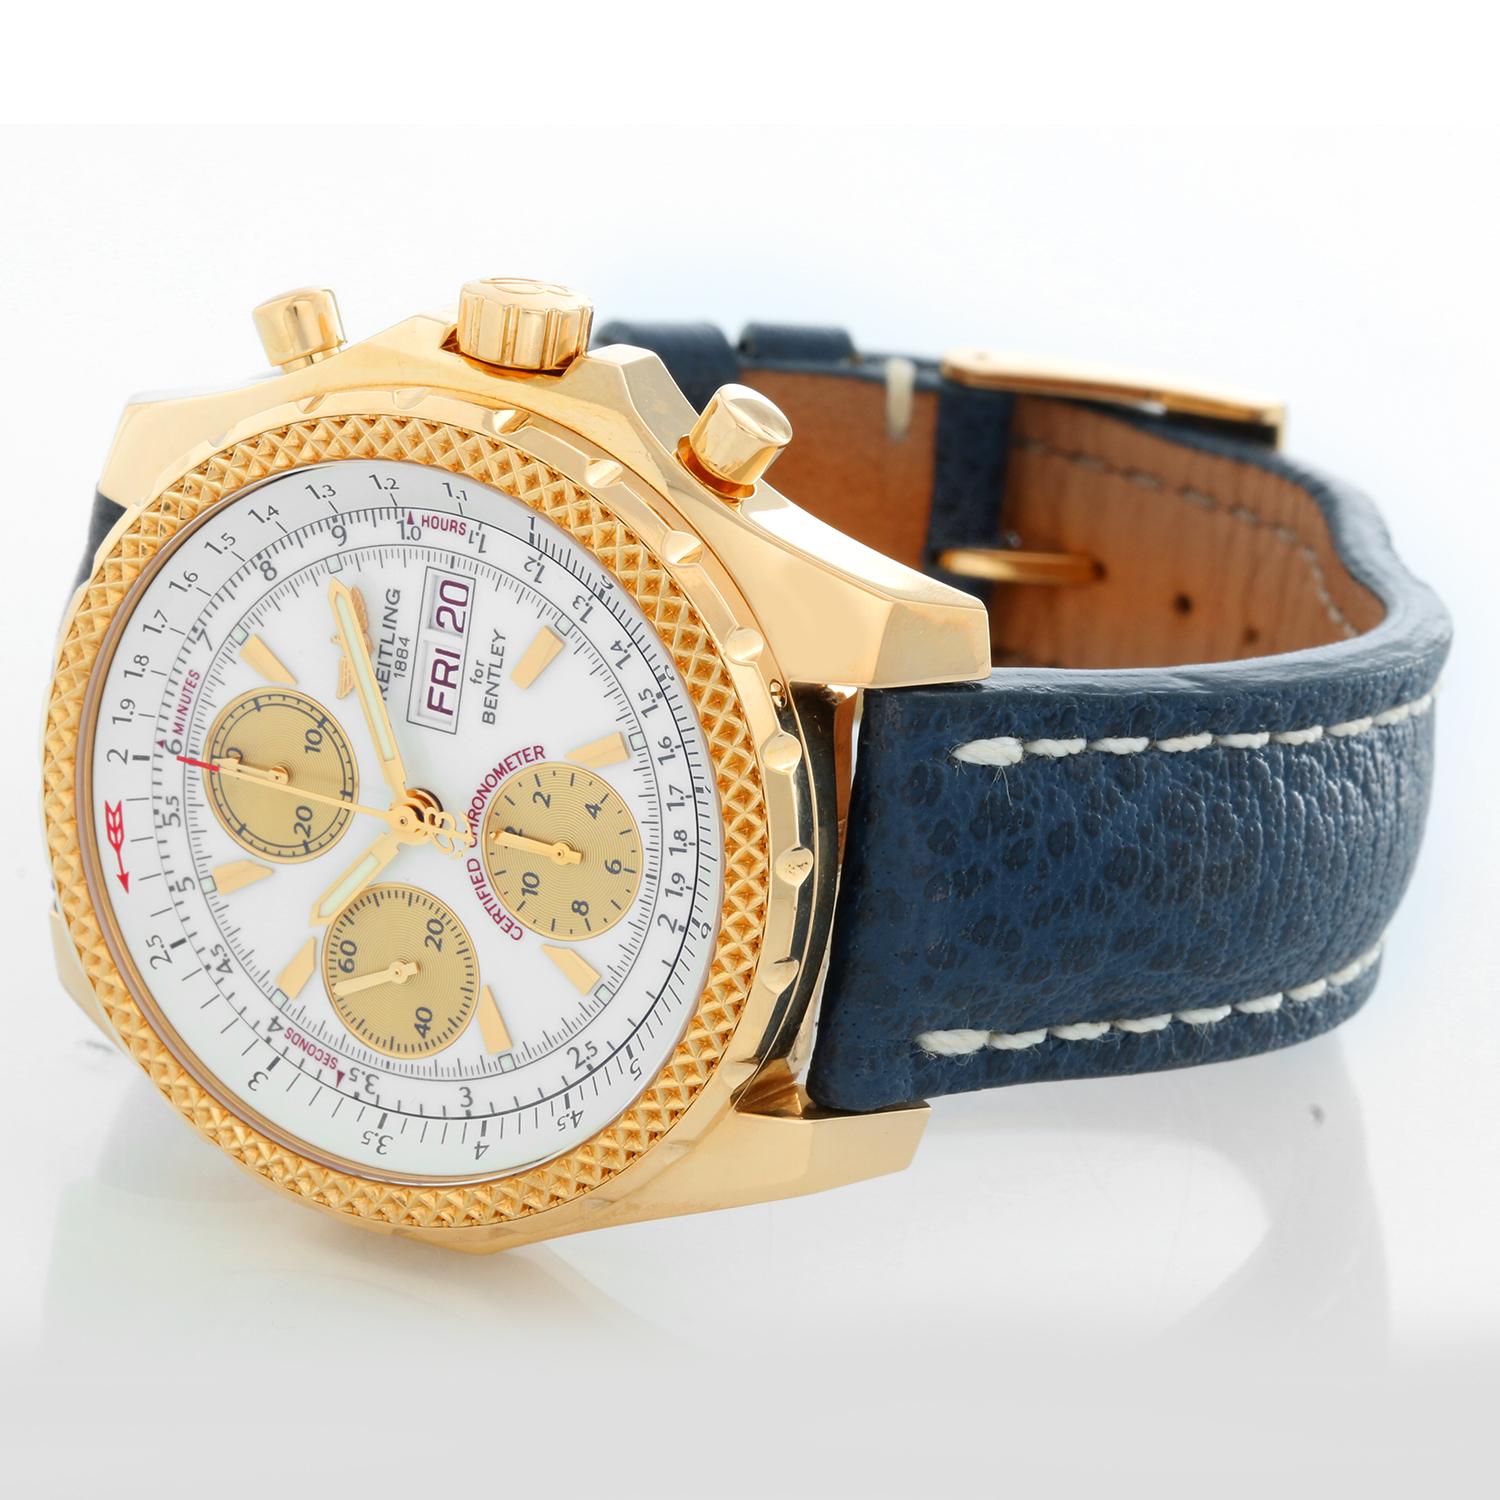 Breitling Bentley Men's 18k Yellow Gold Chronograph Watch K1336212 - Automatic winding chronograph with date. 18k yellow gold case with rotating bezel (50mm diameter). White dial ; gold stick markers; date; hour, minute and seconds recorders. Strap